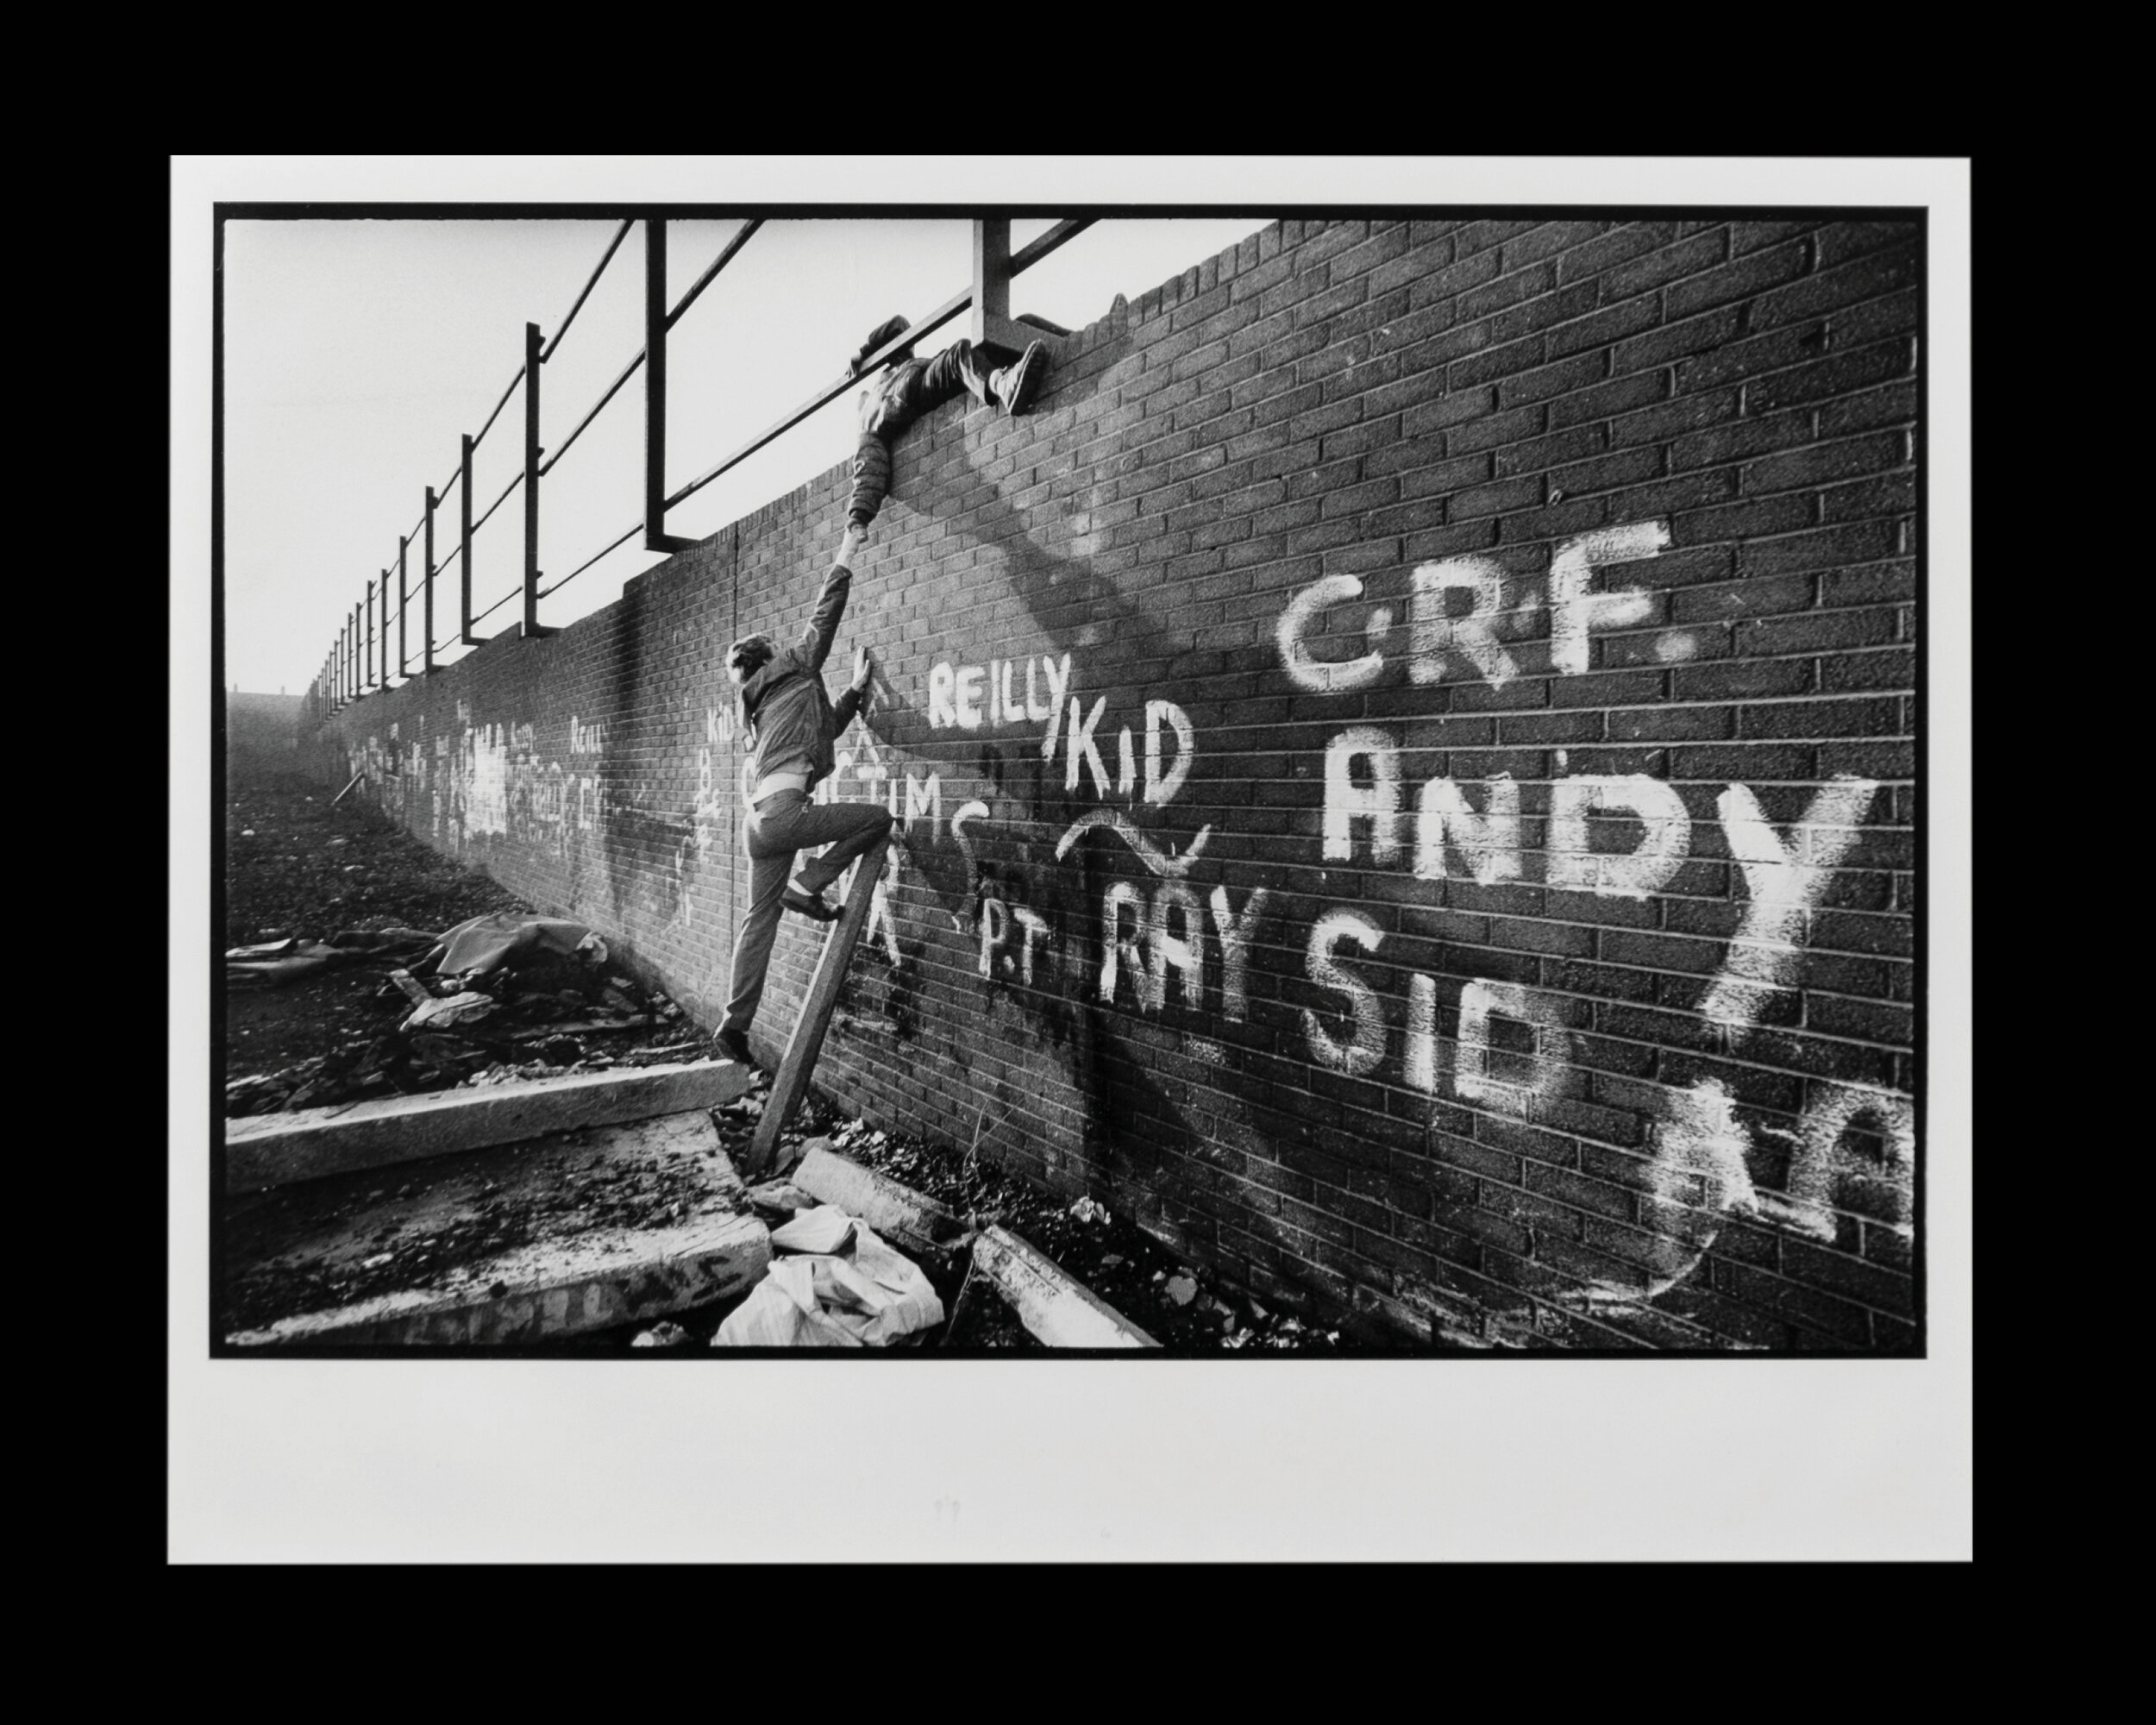  Local boys climb one of the largest Peace Walls scattered throughout Belfast to separate the Protestants and Catholics in Northern Ireland. 1988 